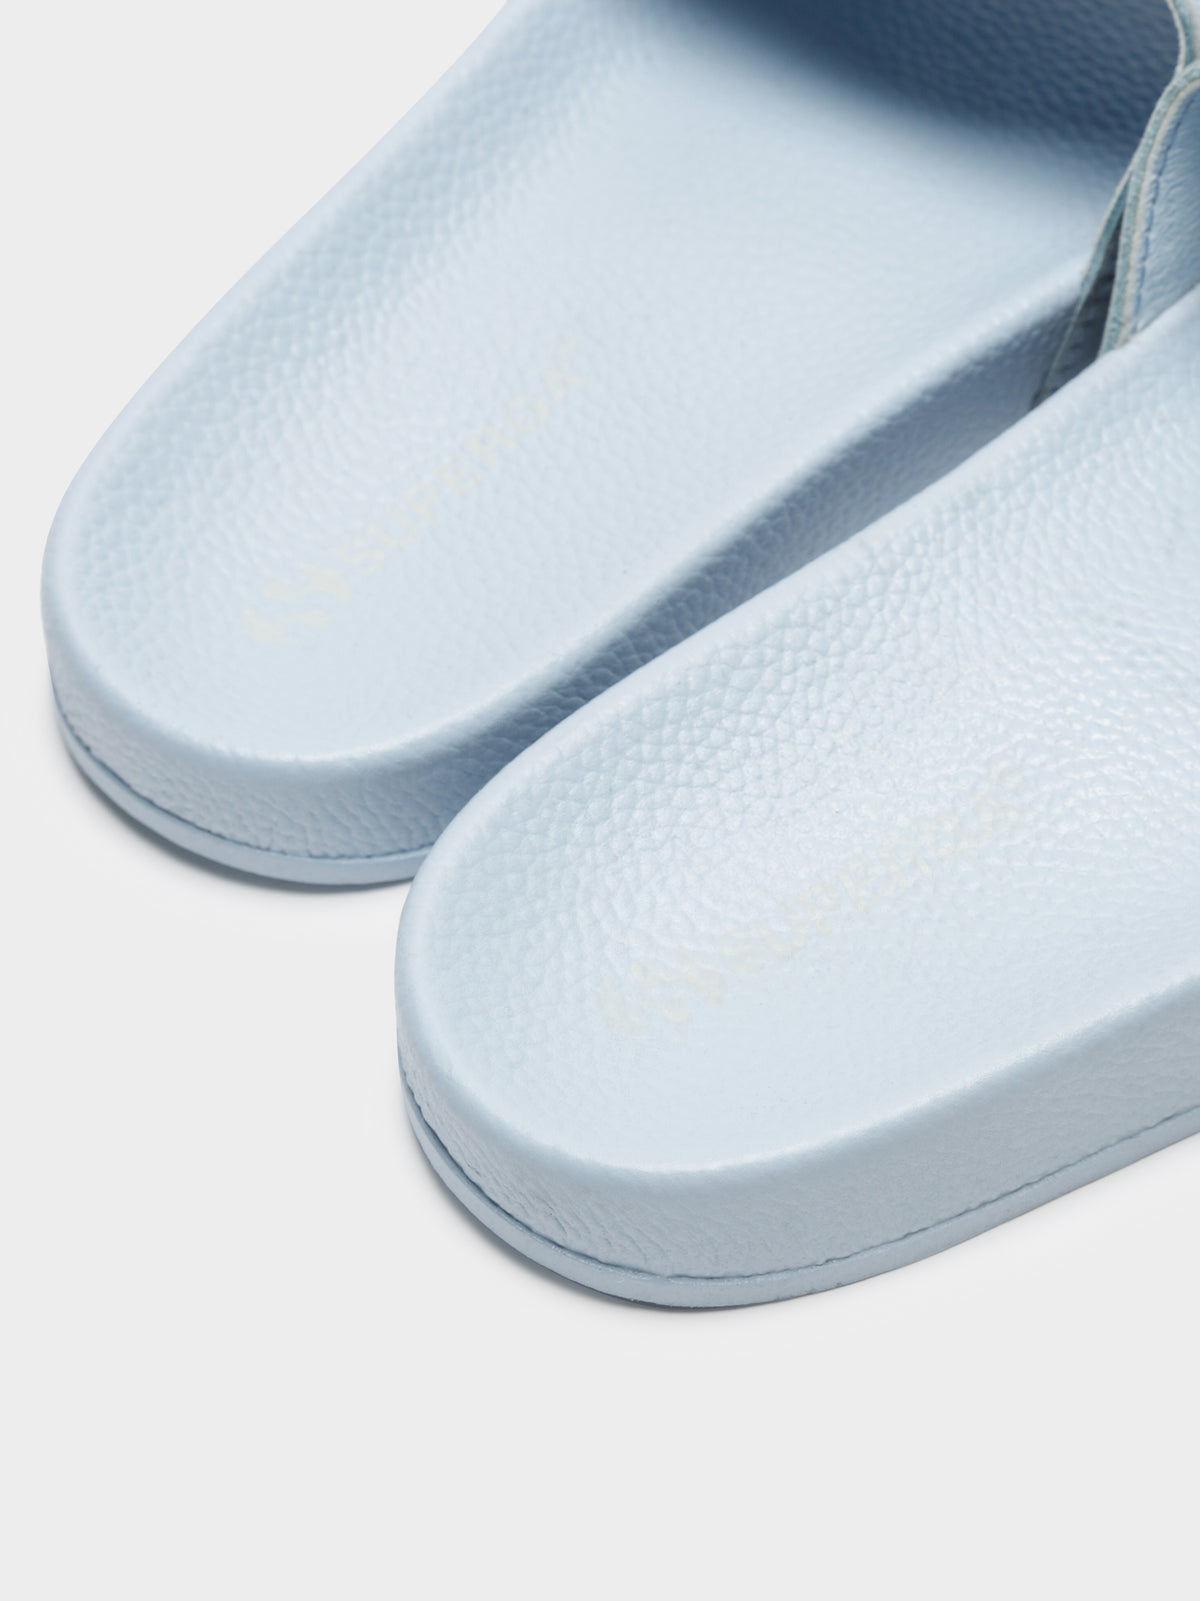 Womens 1908 Slides in Buttersoft Blue